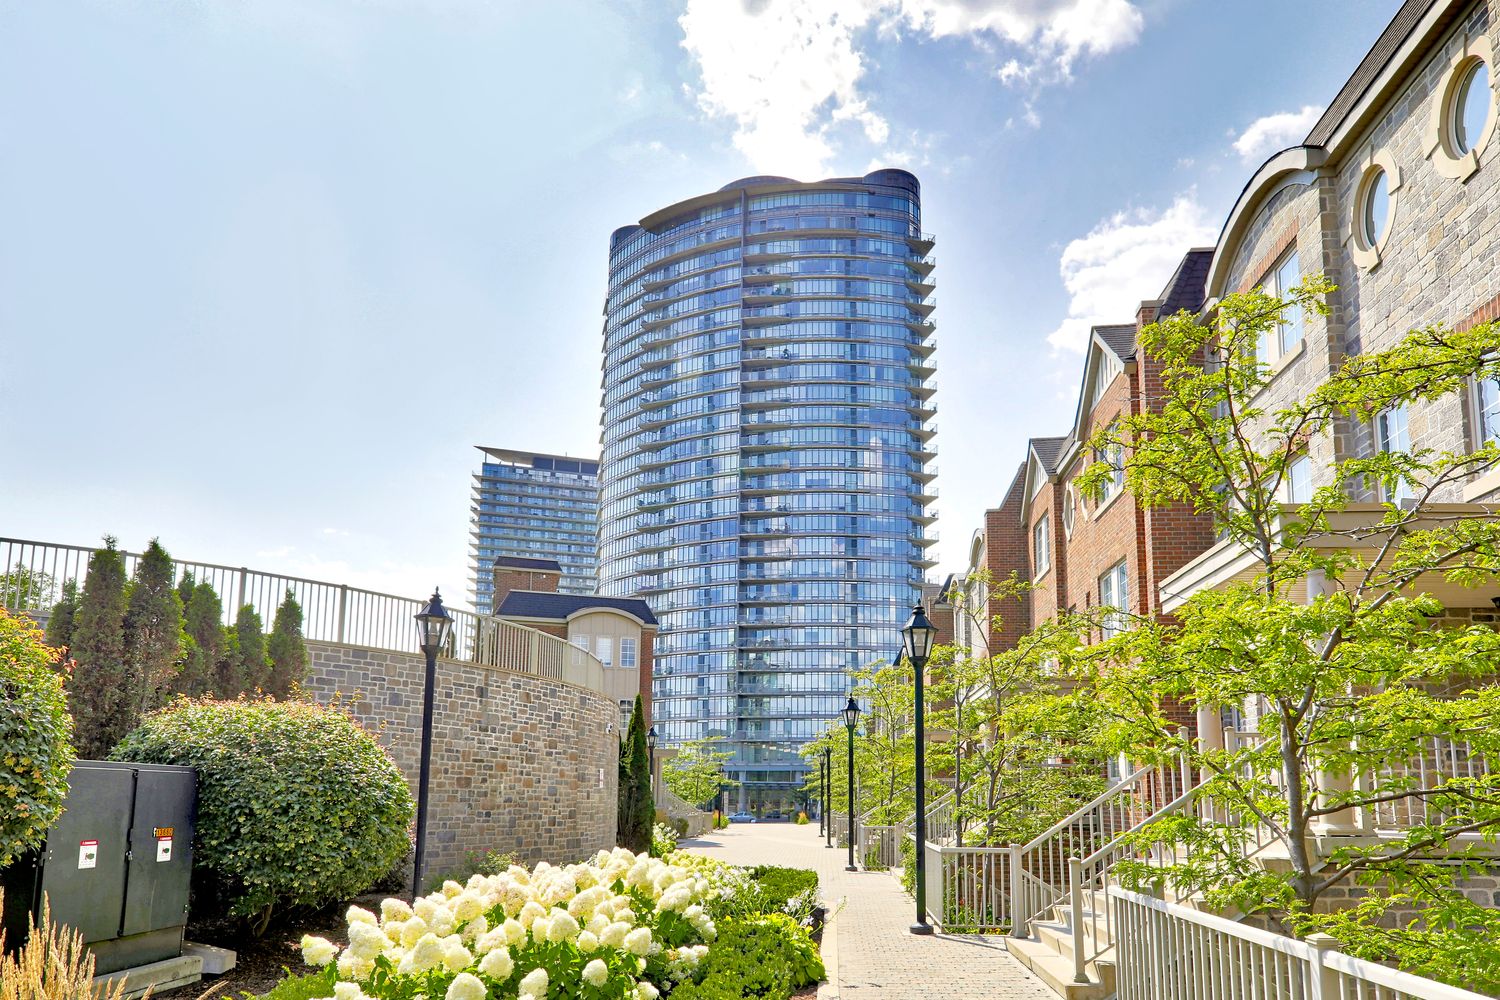 15 Windermere Avenue. Windermere By The Lake is located in  West End, Toronto - image #2 of 7